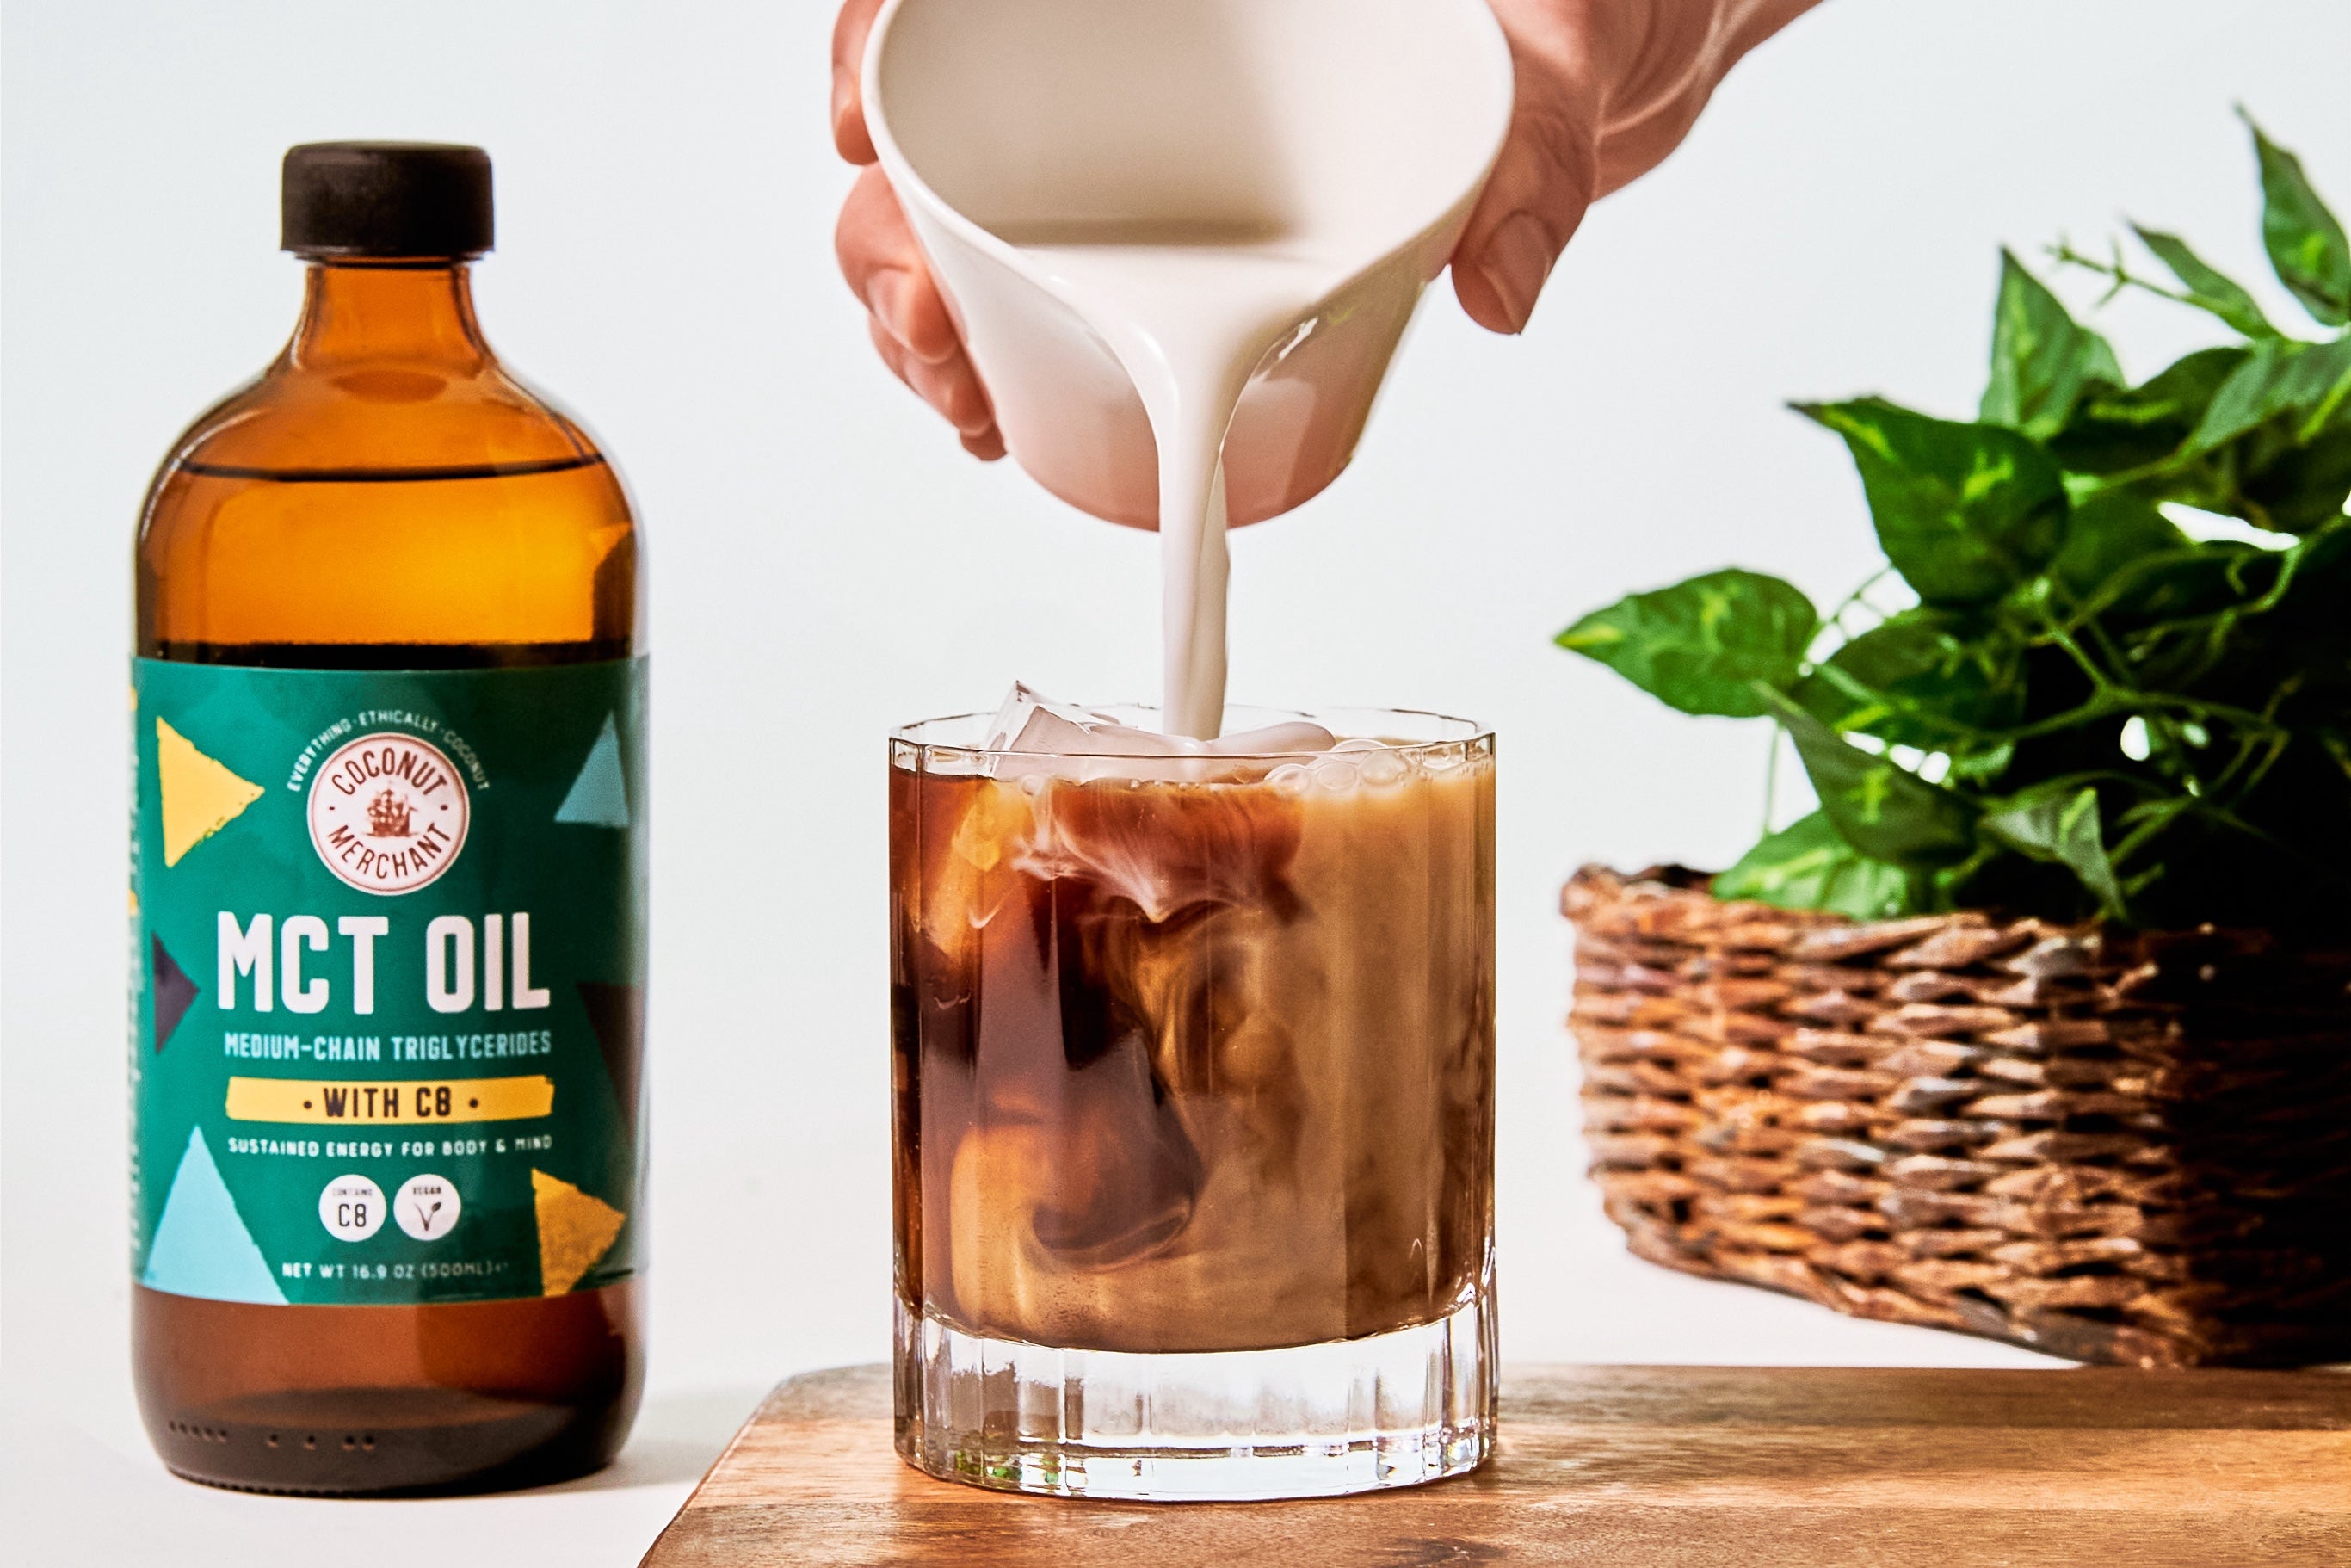 Bottle of MCT oil with someone pouring in coconut milk into a small glass of coffee next to it